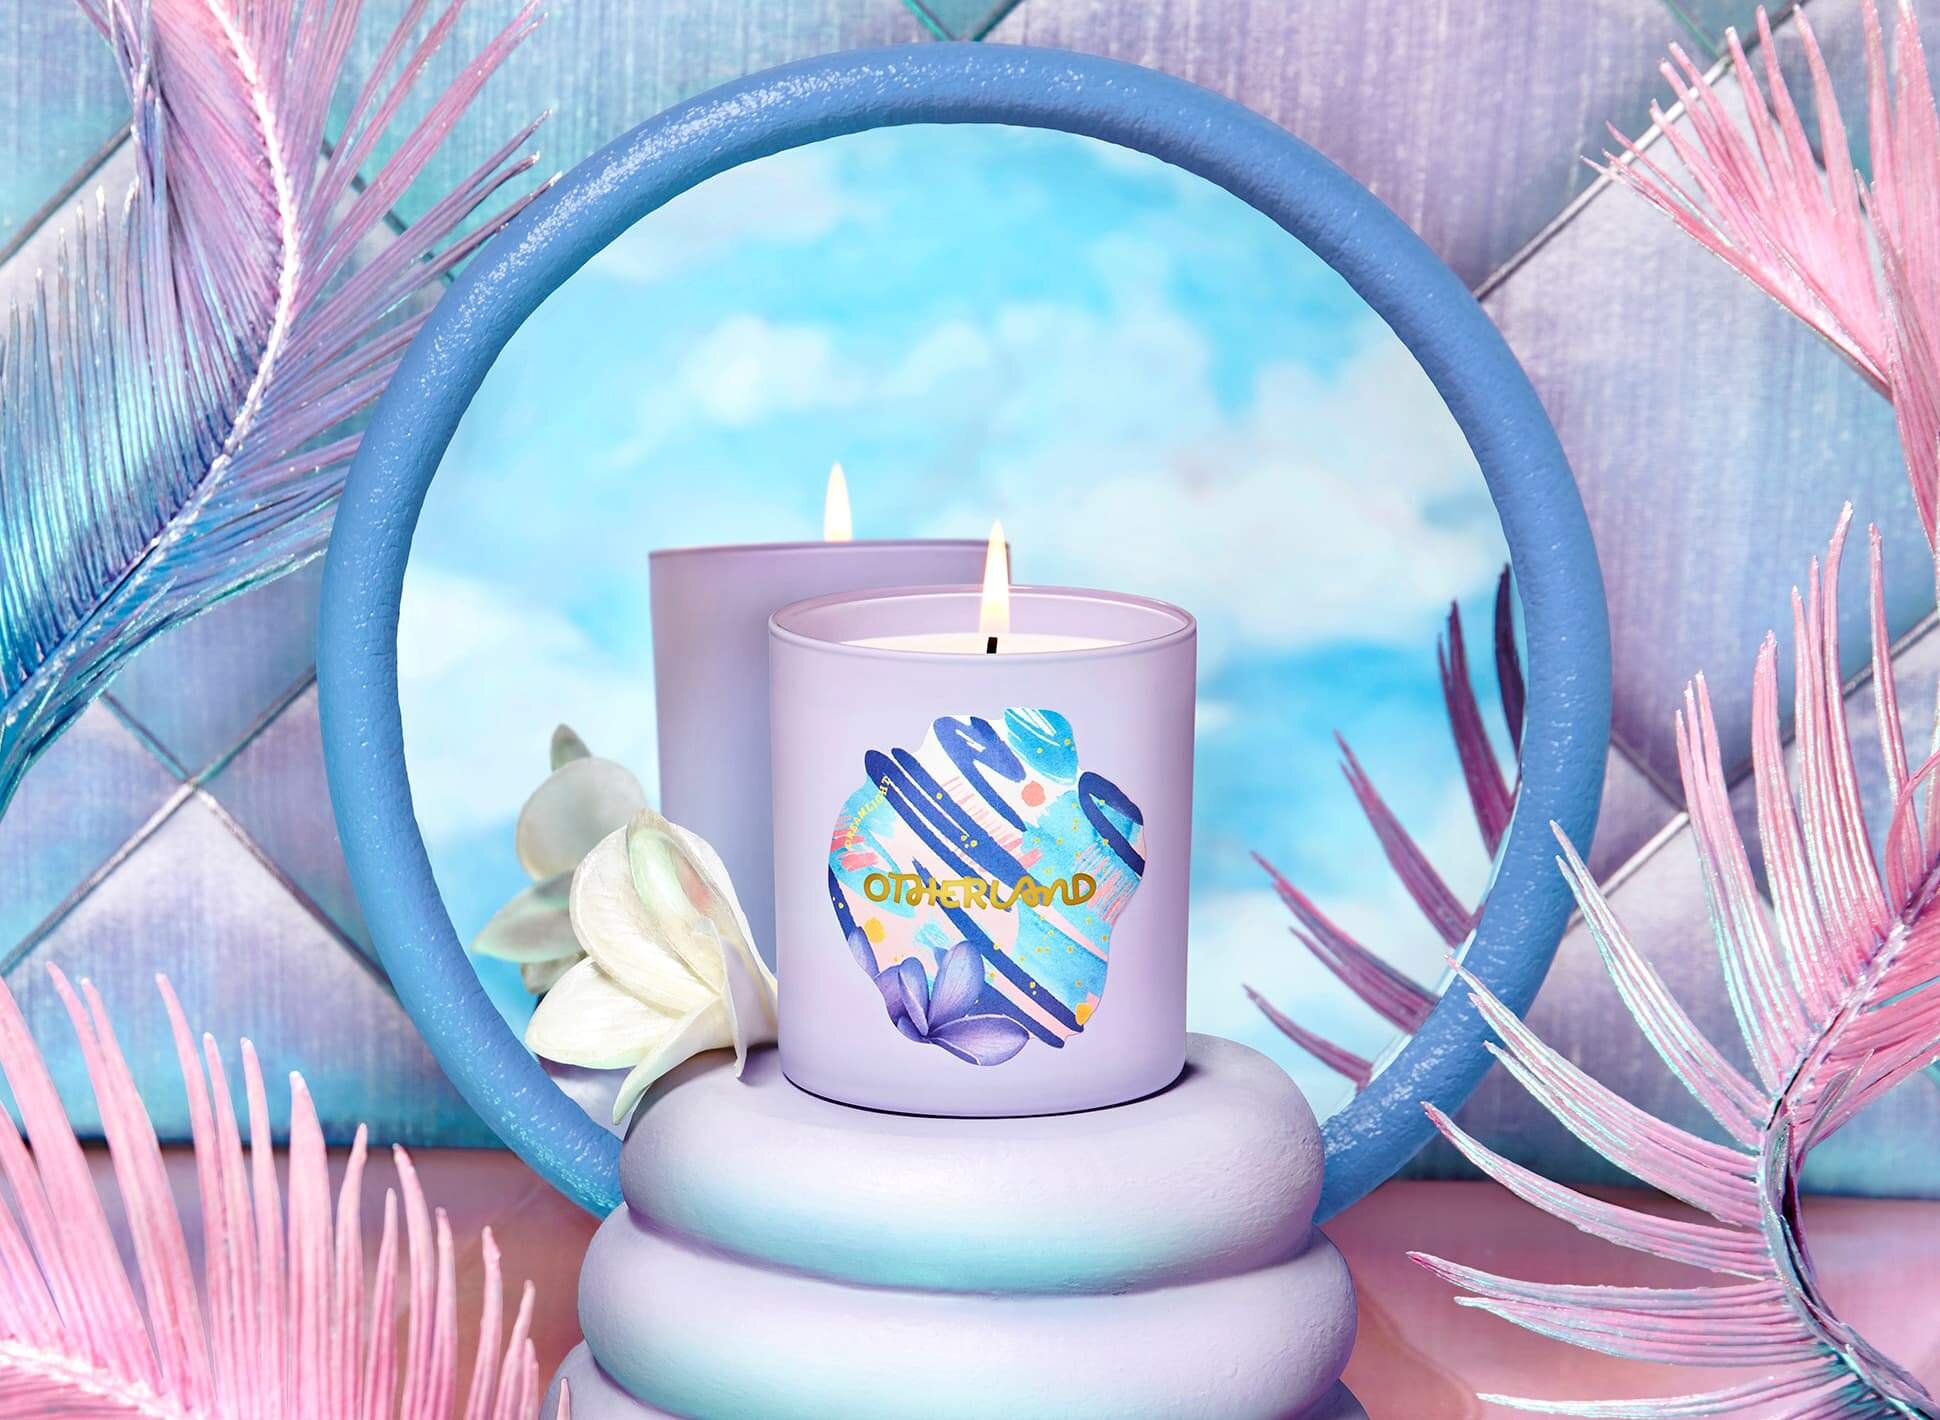 Dreamlight candle by Otherland